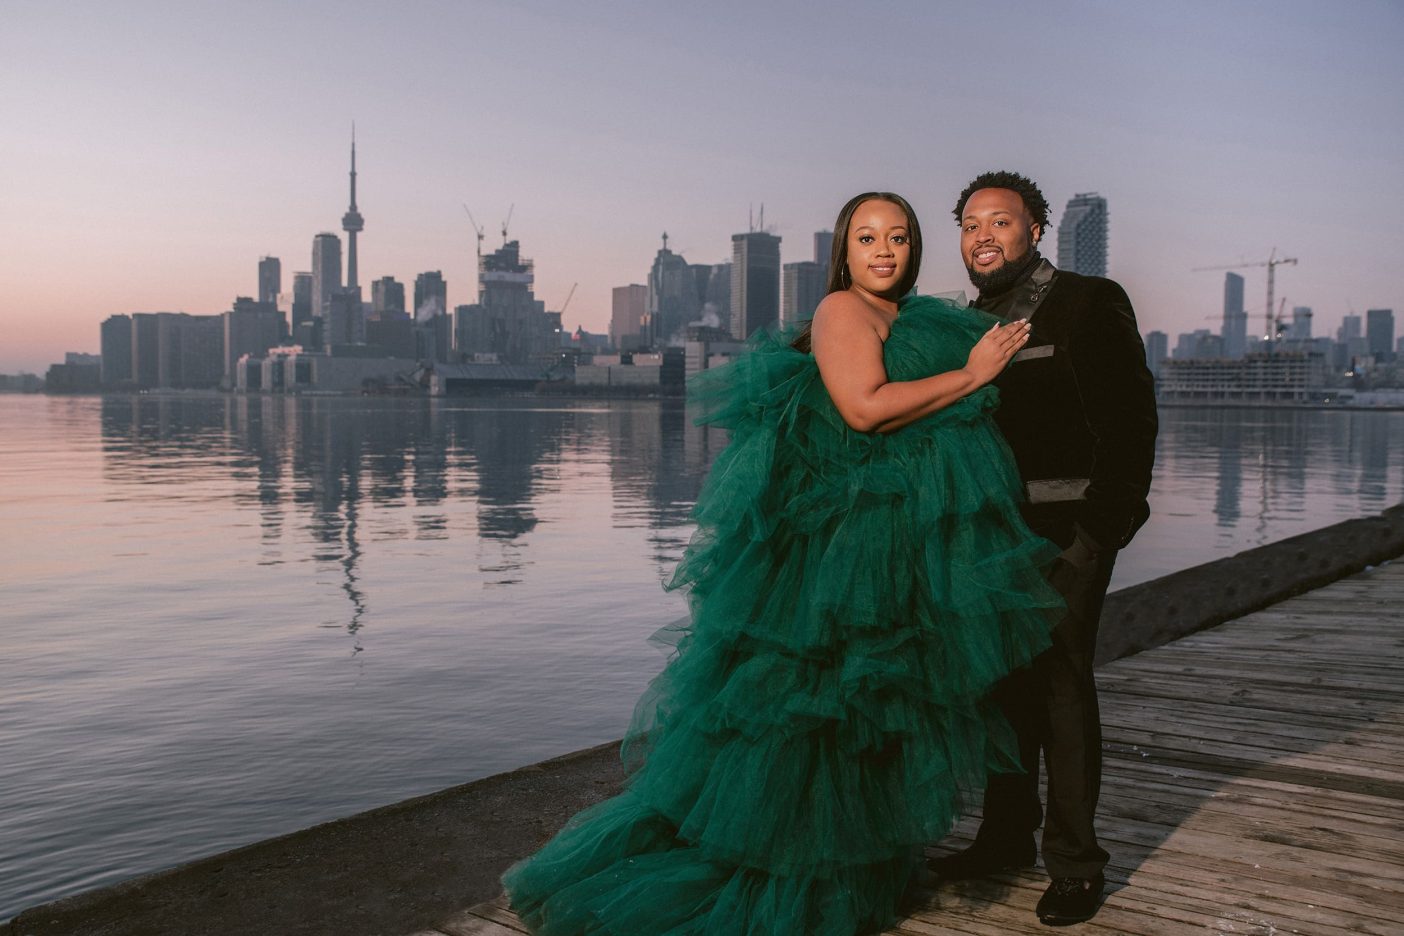 A recently engaged couple pose for a photo at Polson Pier in Toronto. The downtown skyline is seen in the background.